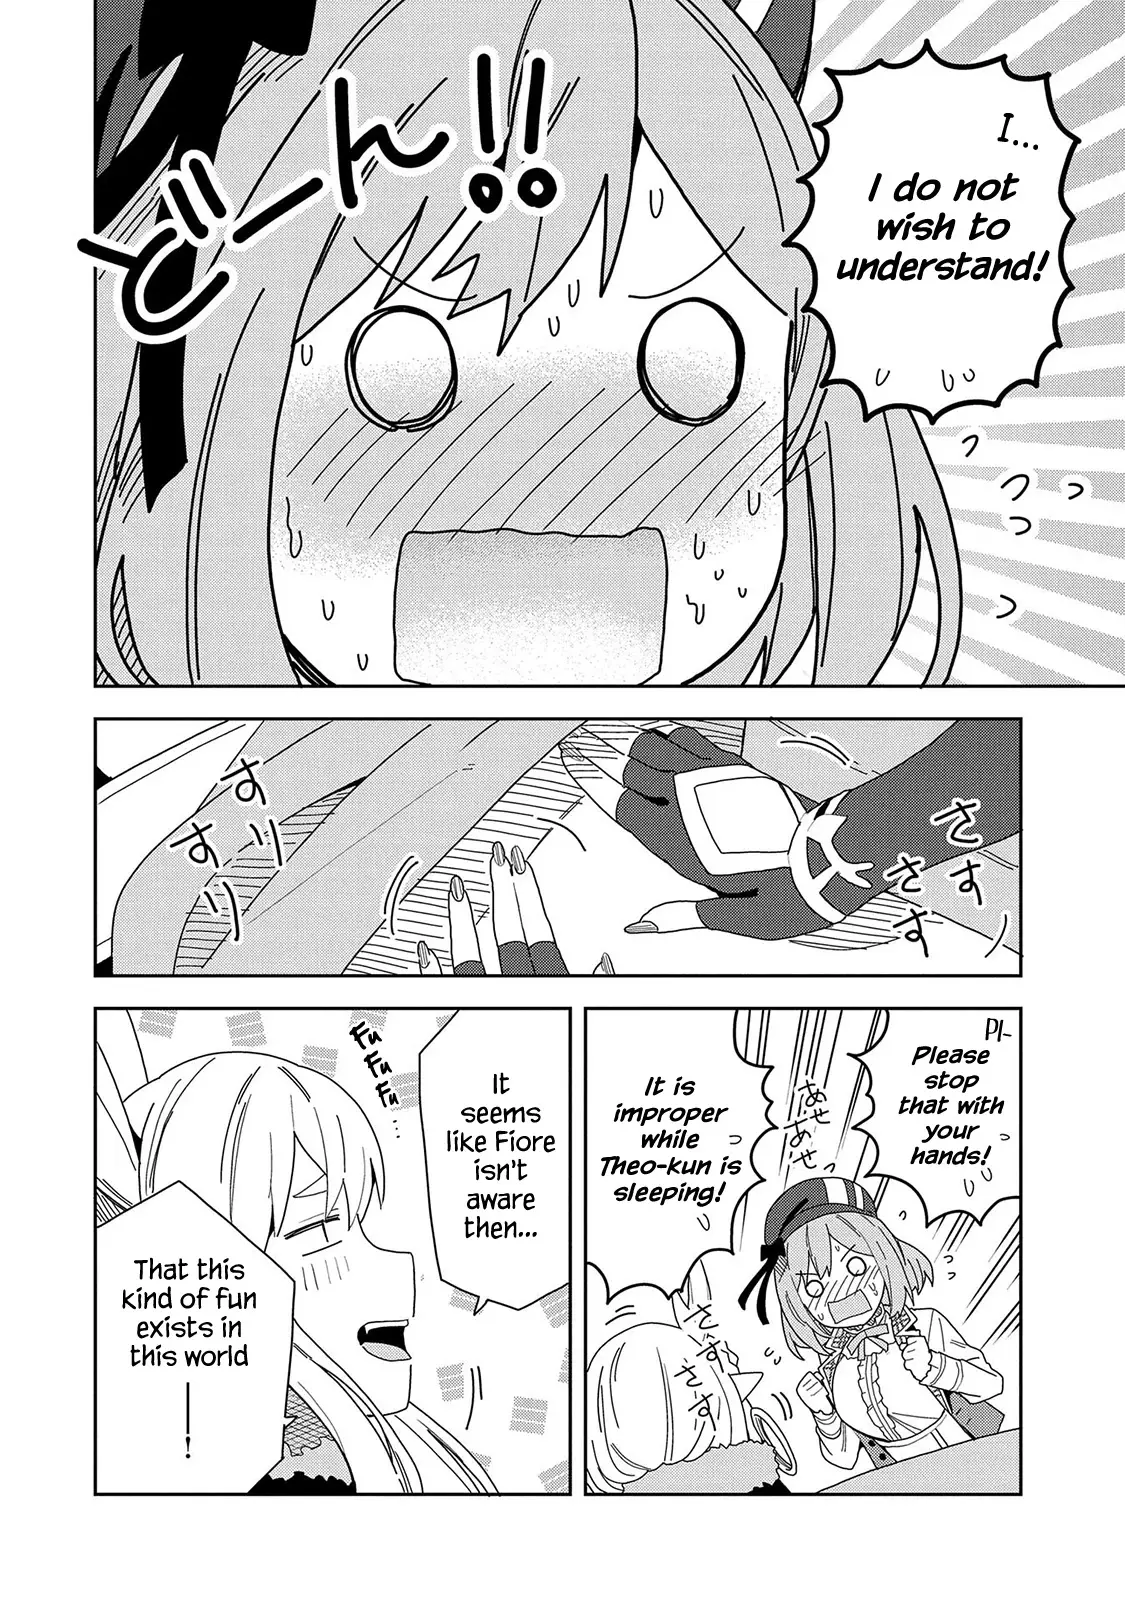 I Summoned The Devil To Grant Me A Wish, But I Married Her Instead Since She Was Adorable ~My New Devil Wife~ - 6 page 20